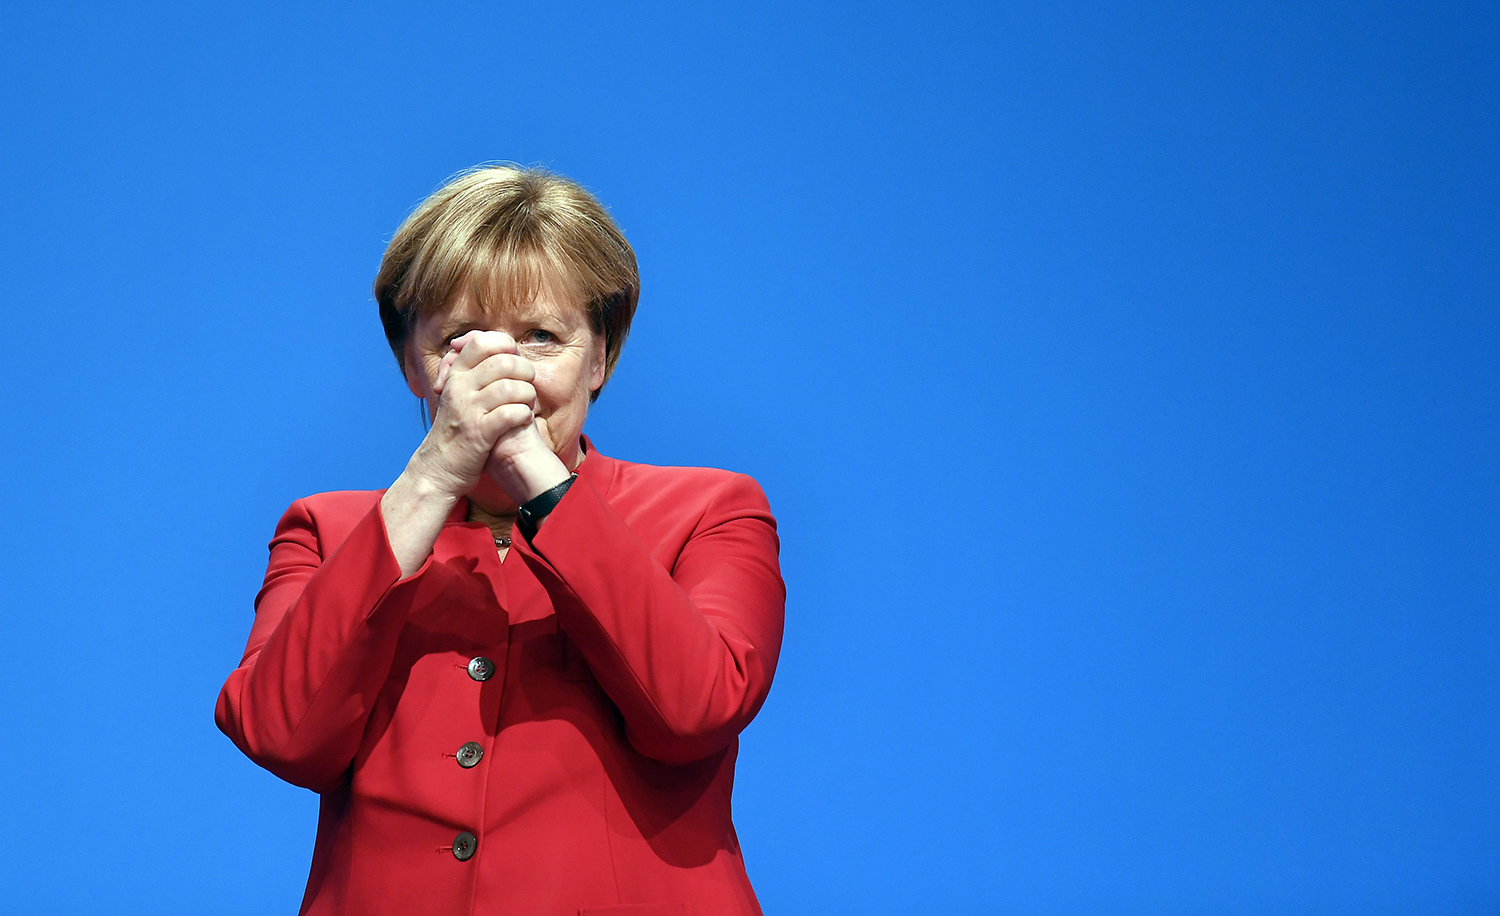 German Chancellor and Chairwomen of the CDU, Angela Merkel, gestures after her speech as part of a general party conference of the Christian Democratic Union (CDU) in Essen, Germany, Tuesday, Dec. 6, 2016. Merkel wants to secure the backing of her conservative party to head up the party's campaign for next September's election. (AP Photo/Martin Meissner)